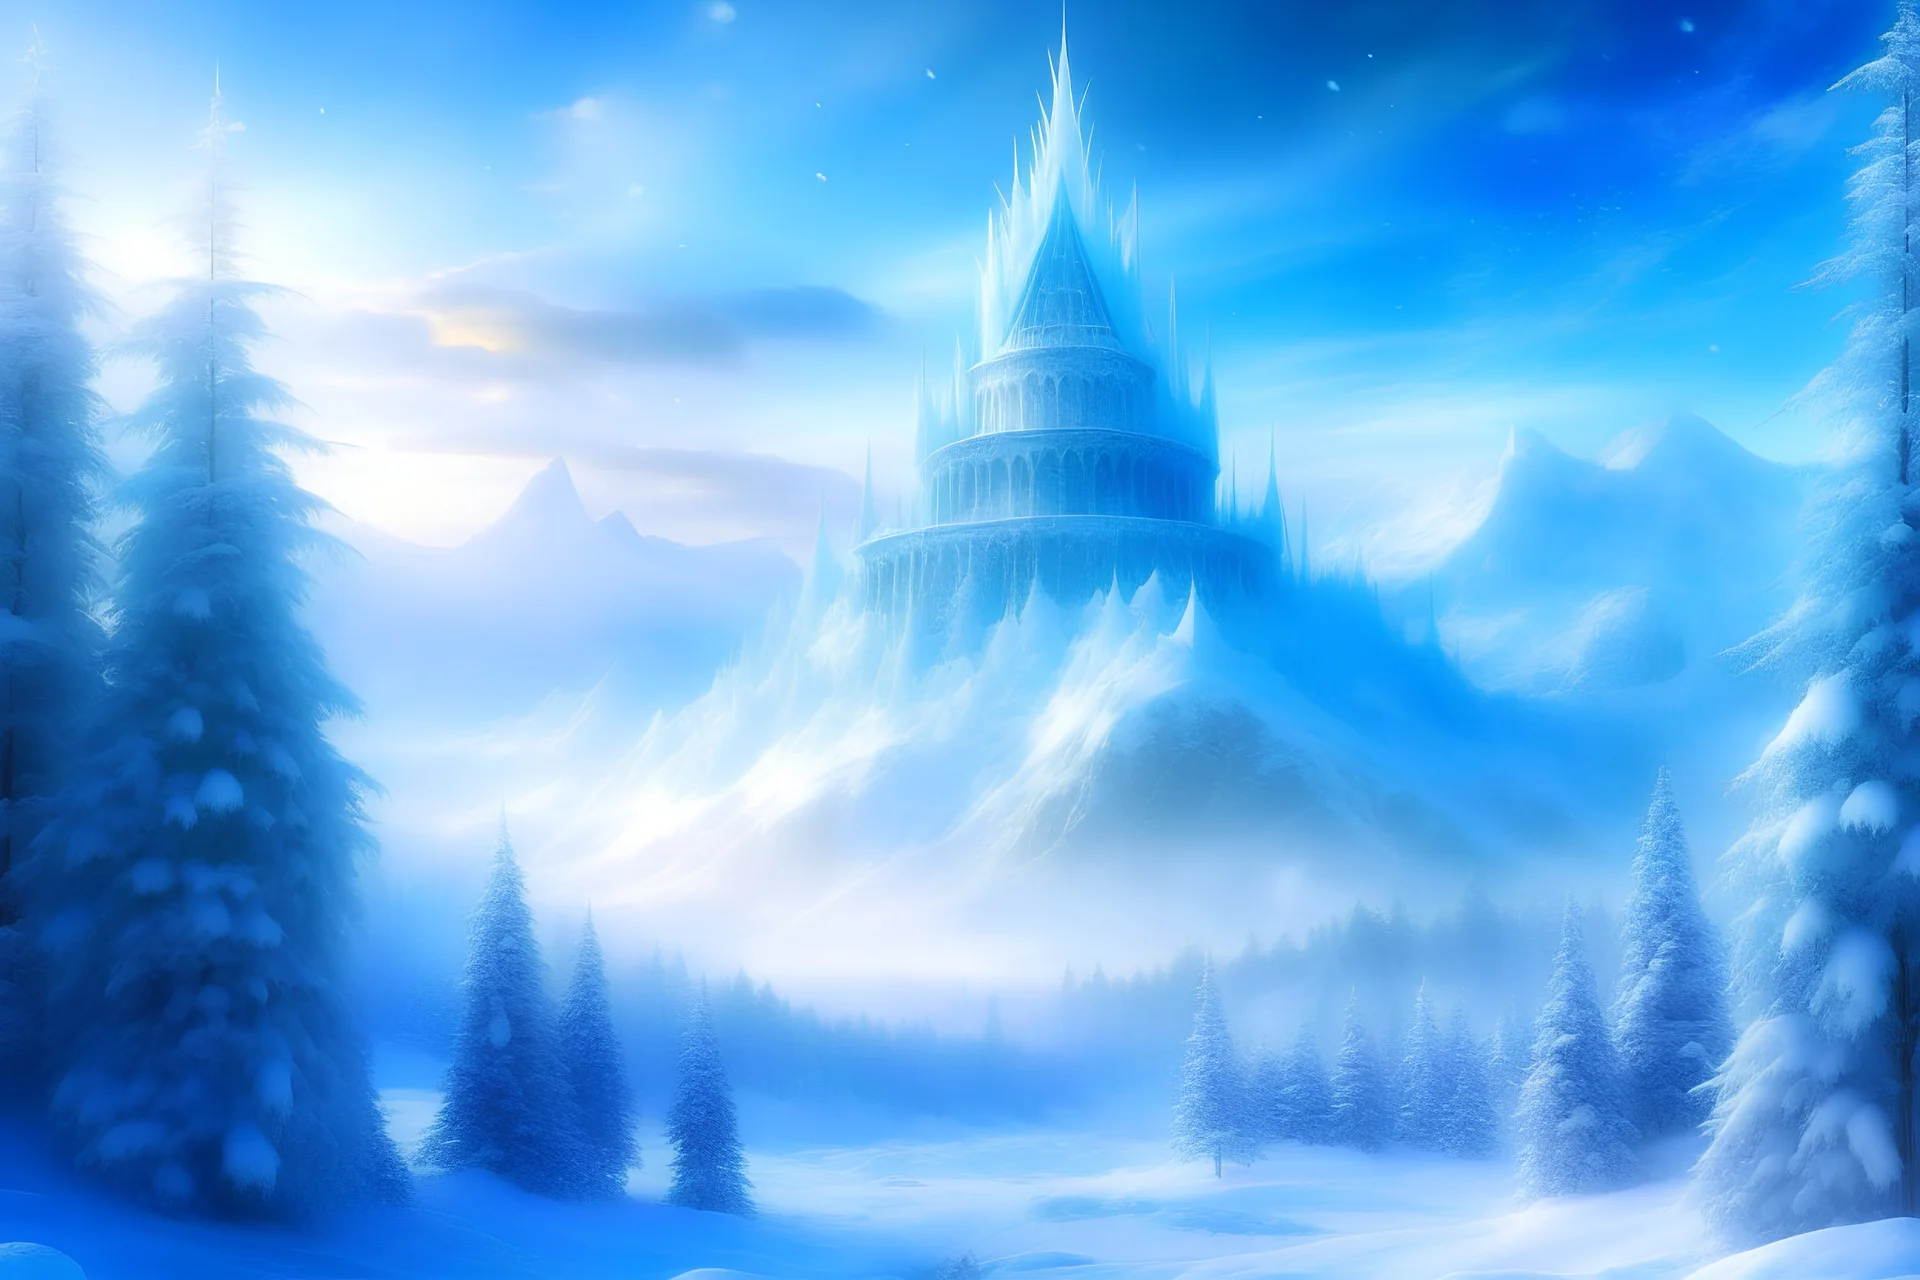 Generate an image depicting a vast, magical land of ice and snow, with towering snow-covered trees, a majestic ice palace in the distance, and gentle snowflakes falling from the sky."